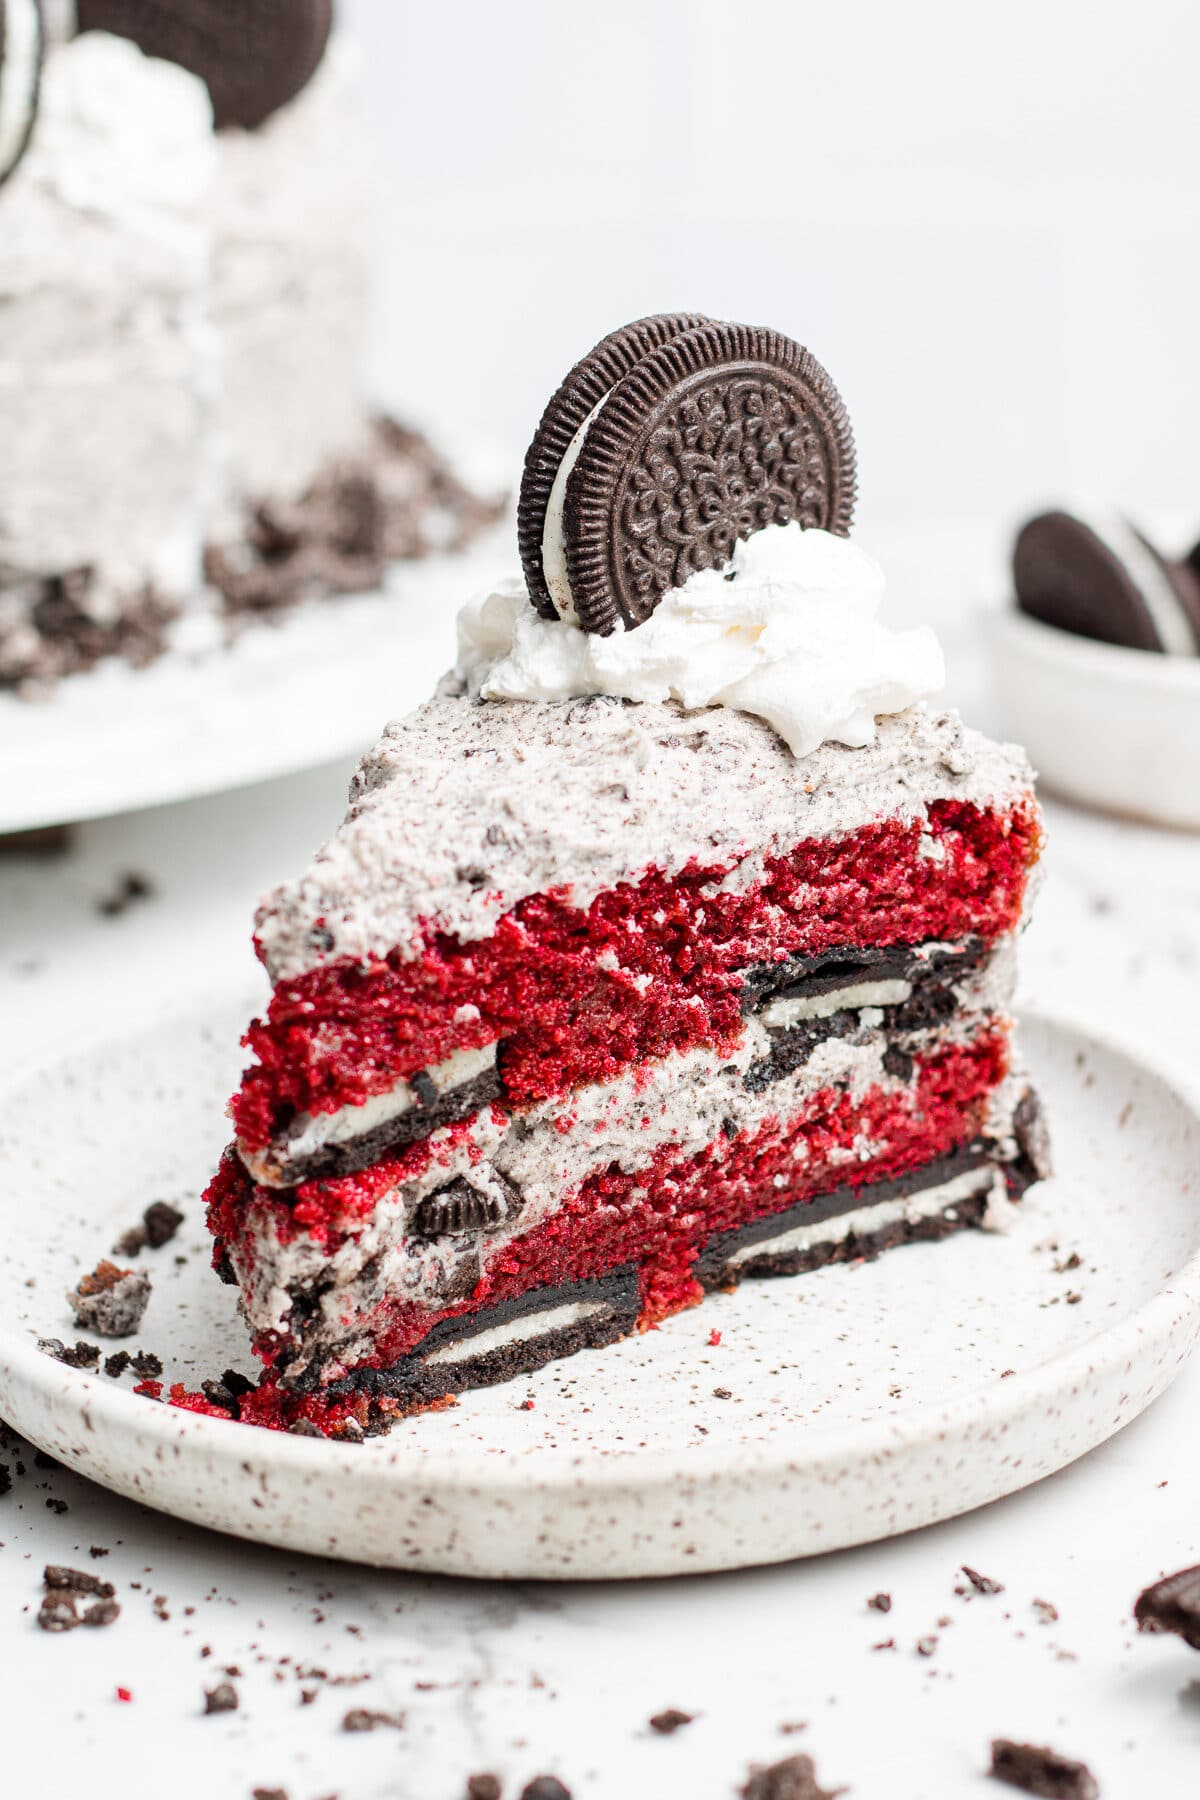 Plated piece of Oreo red velvet cake. Pieces of Oreo scattered around